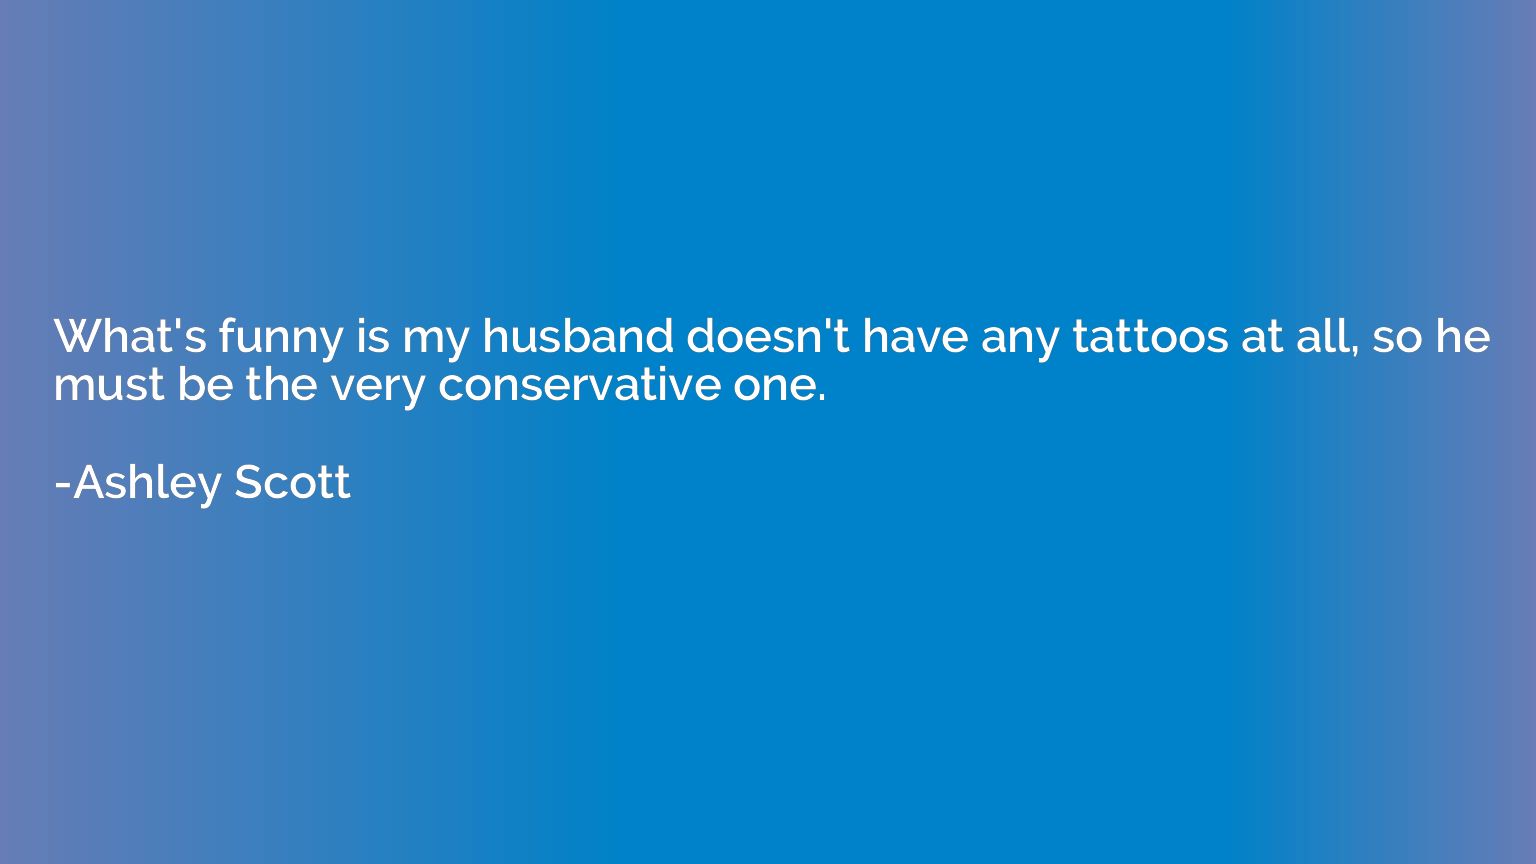 What's funny is my husband doesn't have any tattoos at all, 